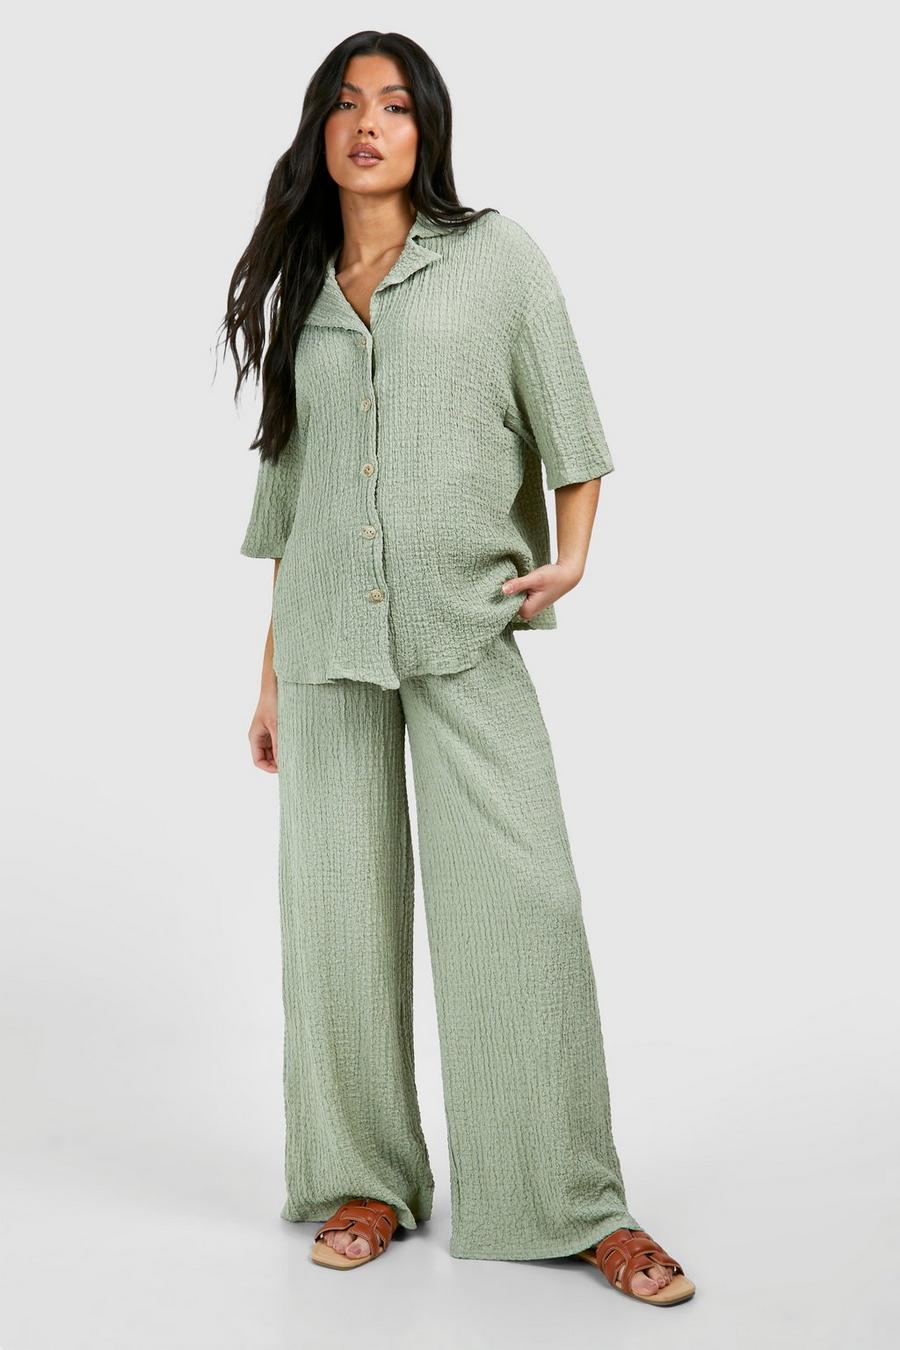 Sage Maternity Honeycomb Textured Short Sleeve Trouser Co-ord